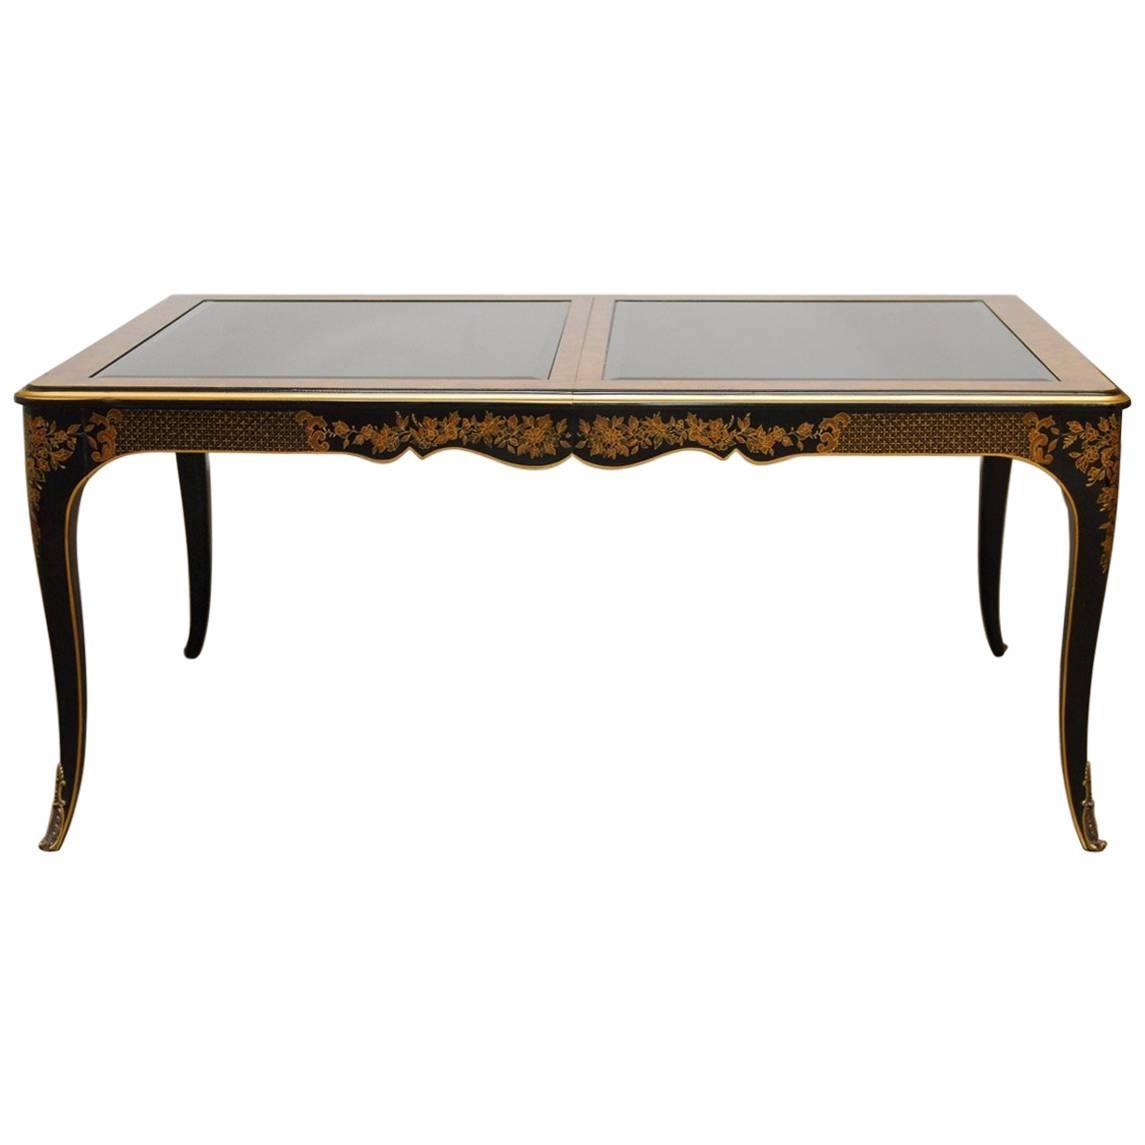 Drexel Et Cetera Black Lacquer Chinoiserie Dining Table